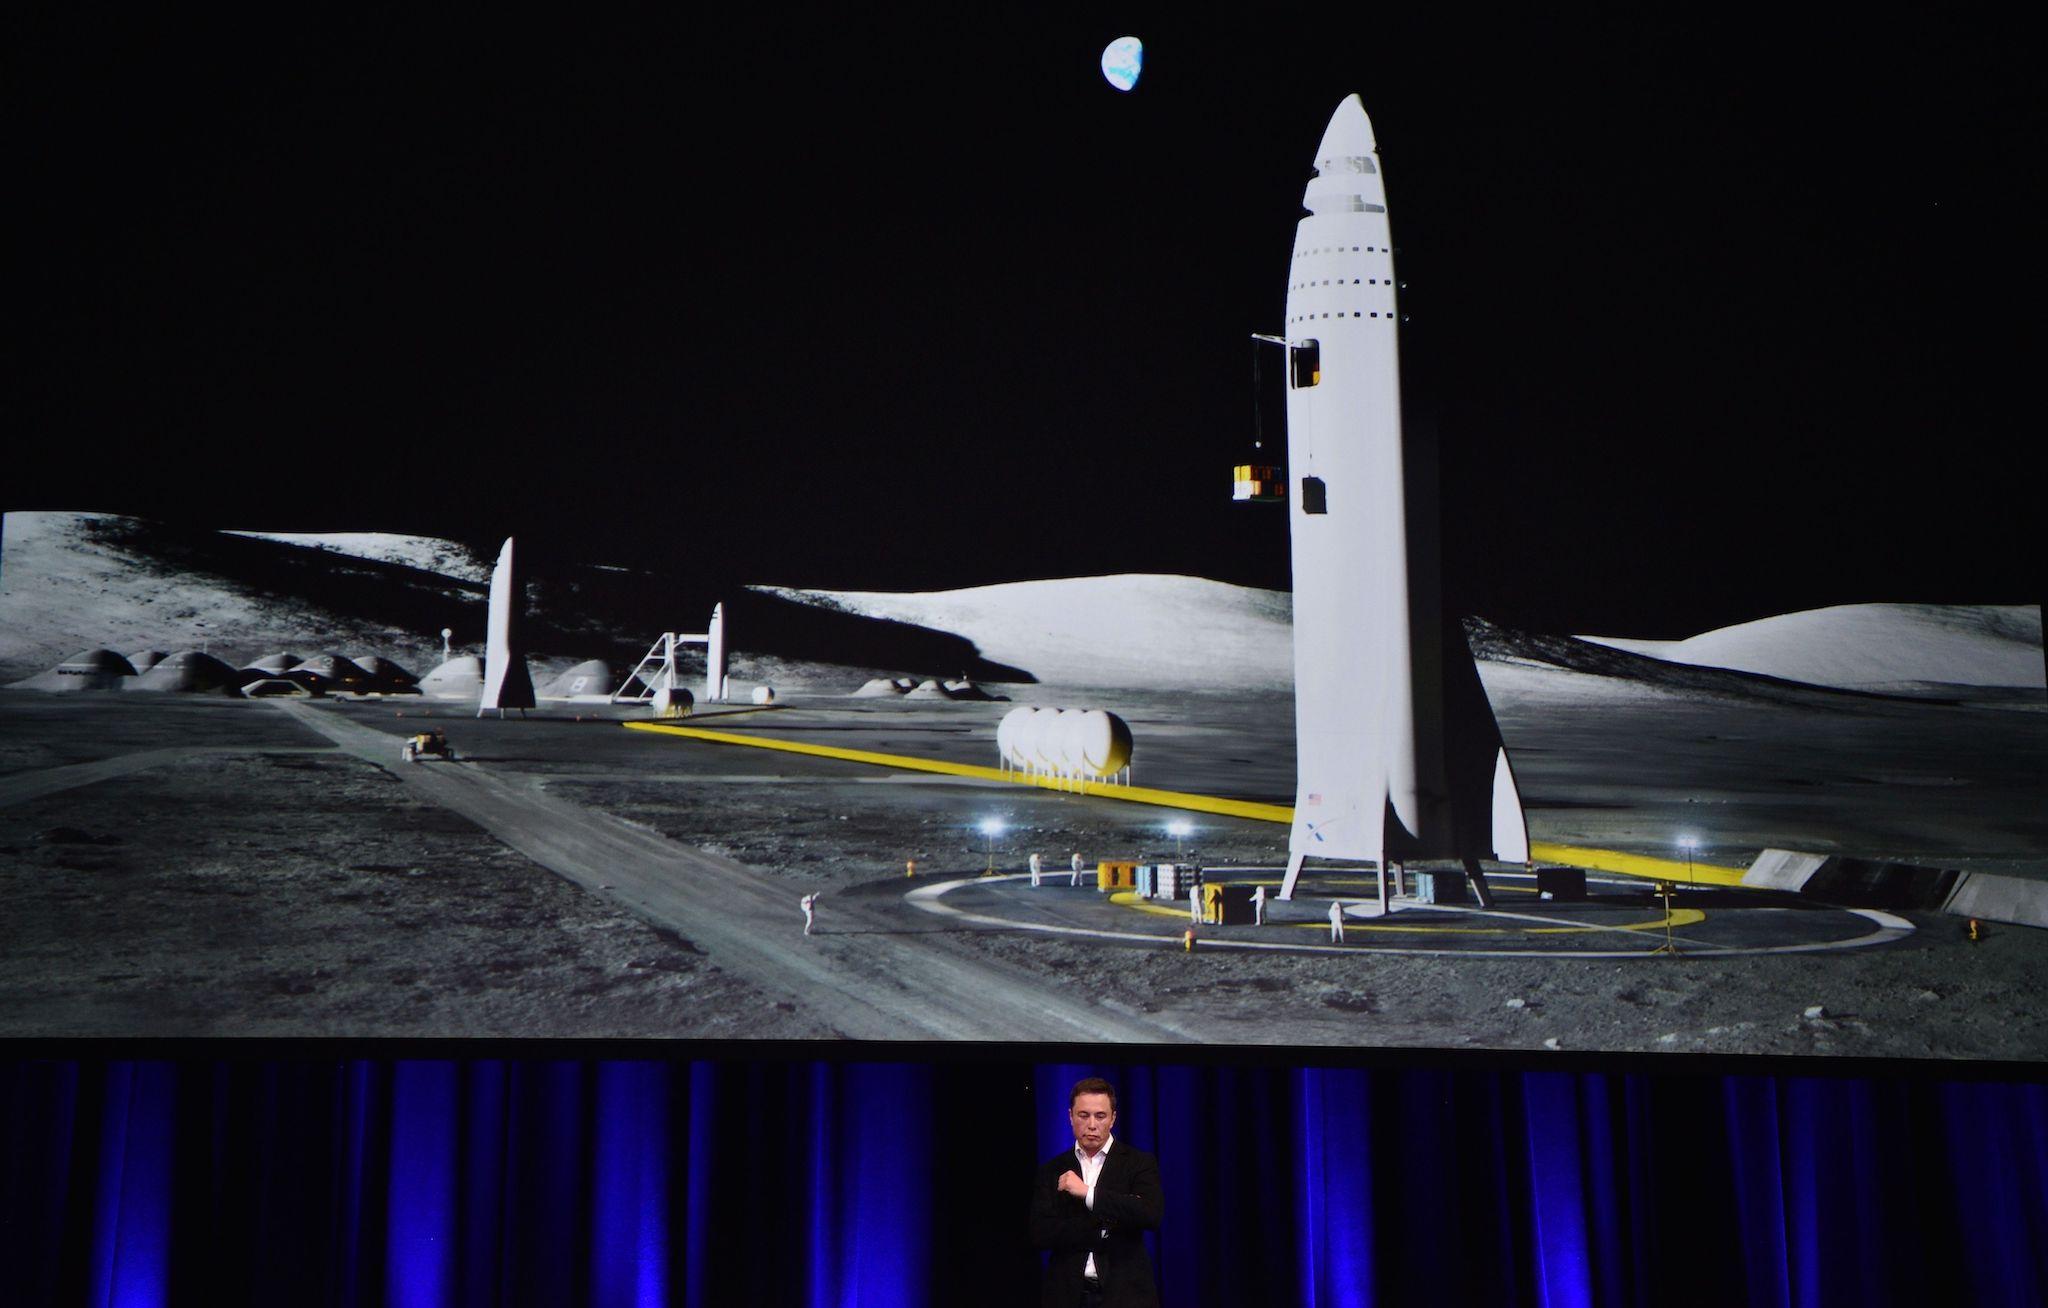 Billionaire entrepreneur and founder of SpaceX Elon Musk speaks below a computer generated illustration of his new rocket at the 68th International Astronautical Congress 2017 in Adelaide on September 29, 2017